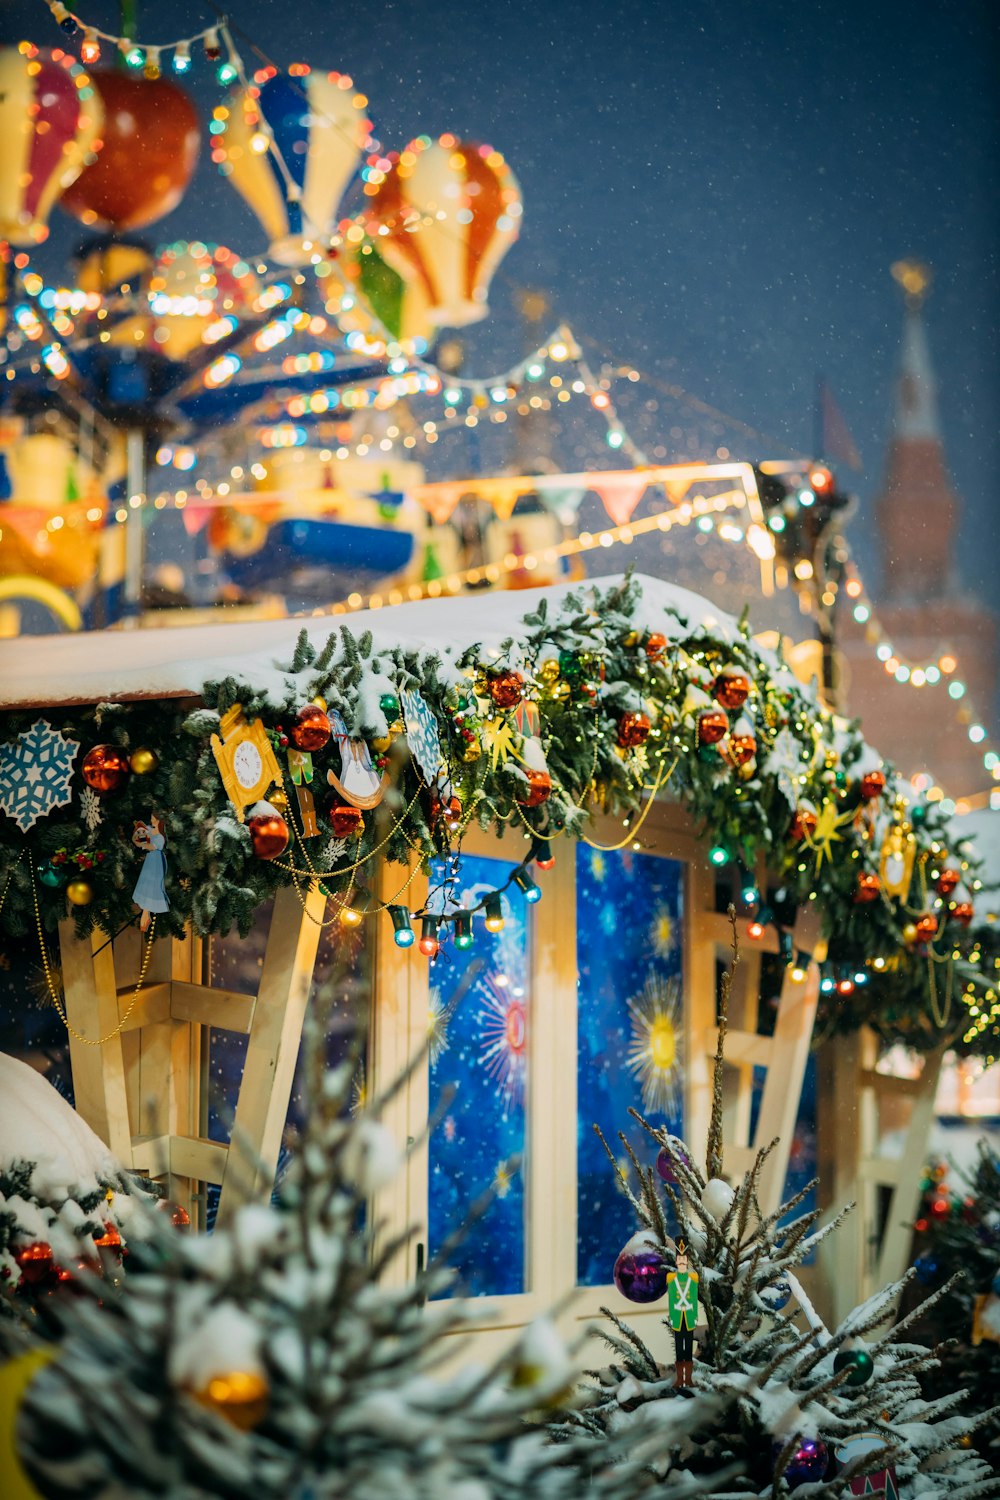 a merry christmas scene with a carousel in the background